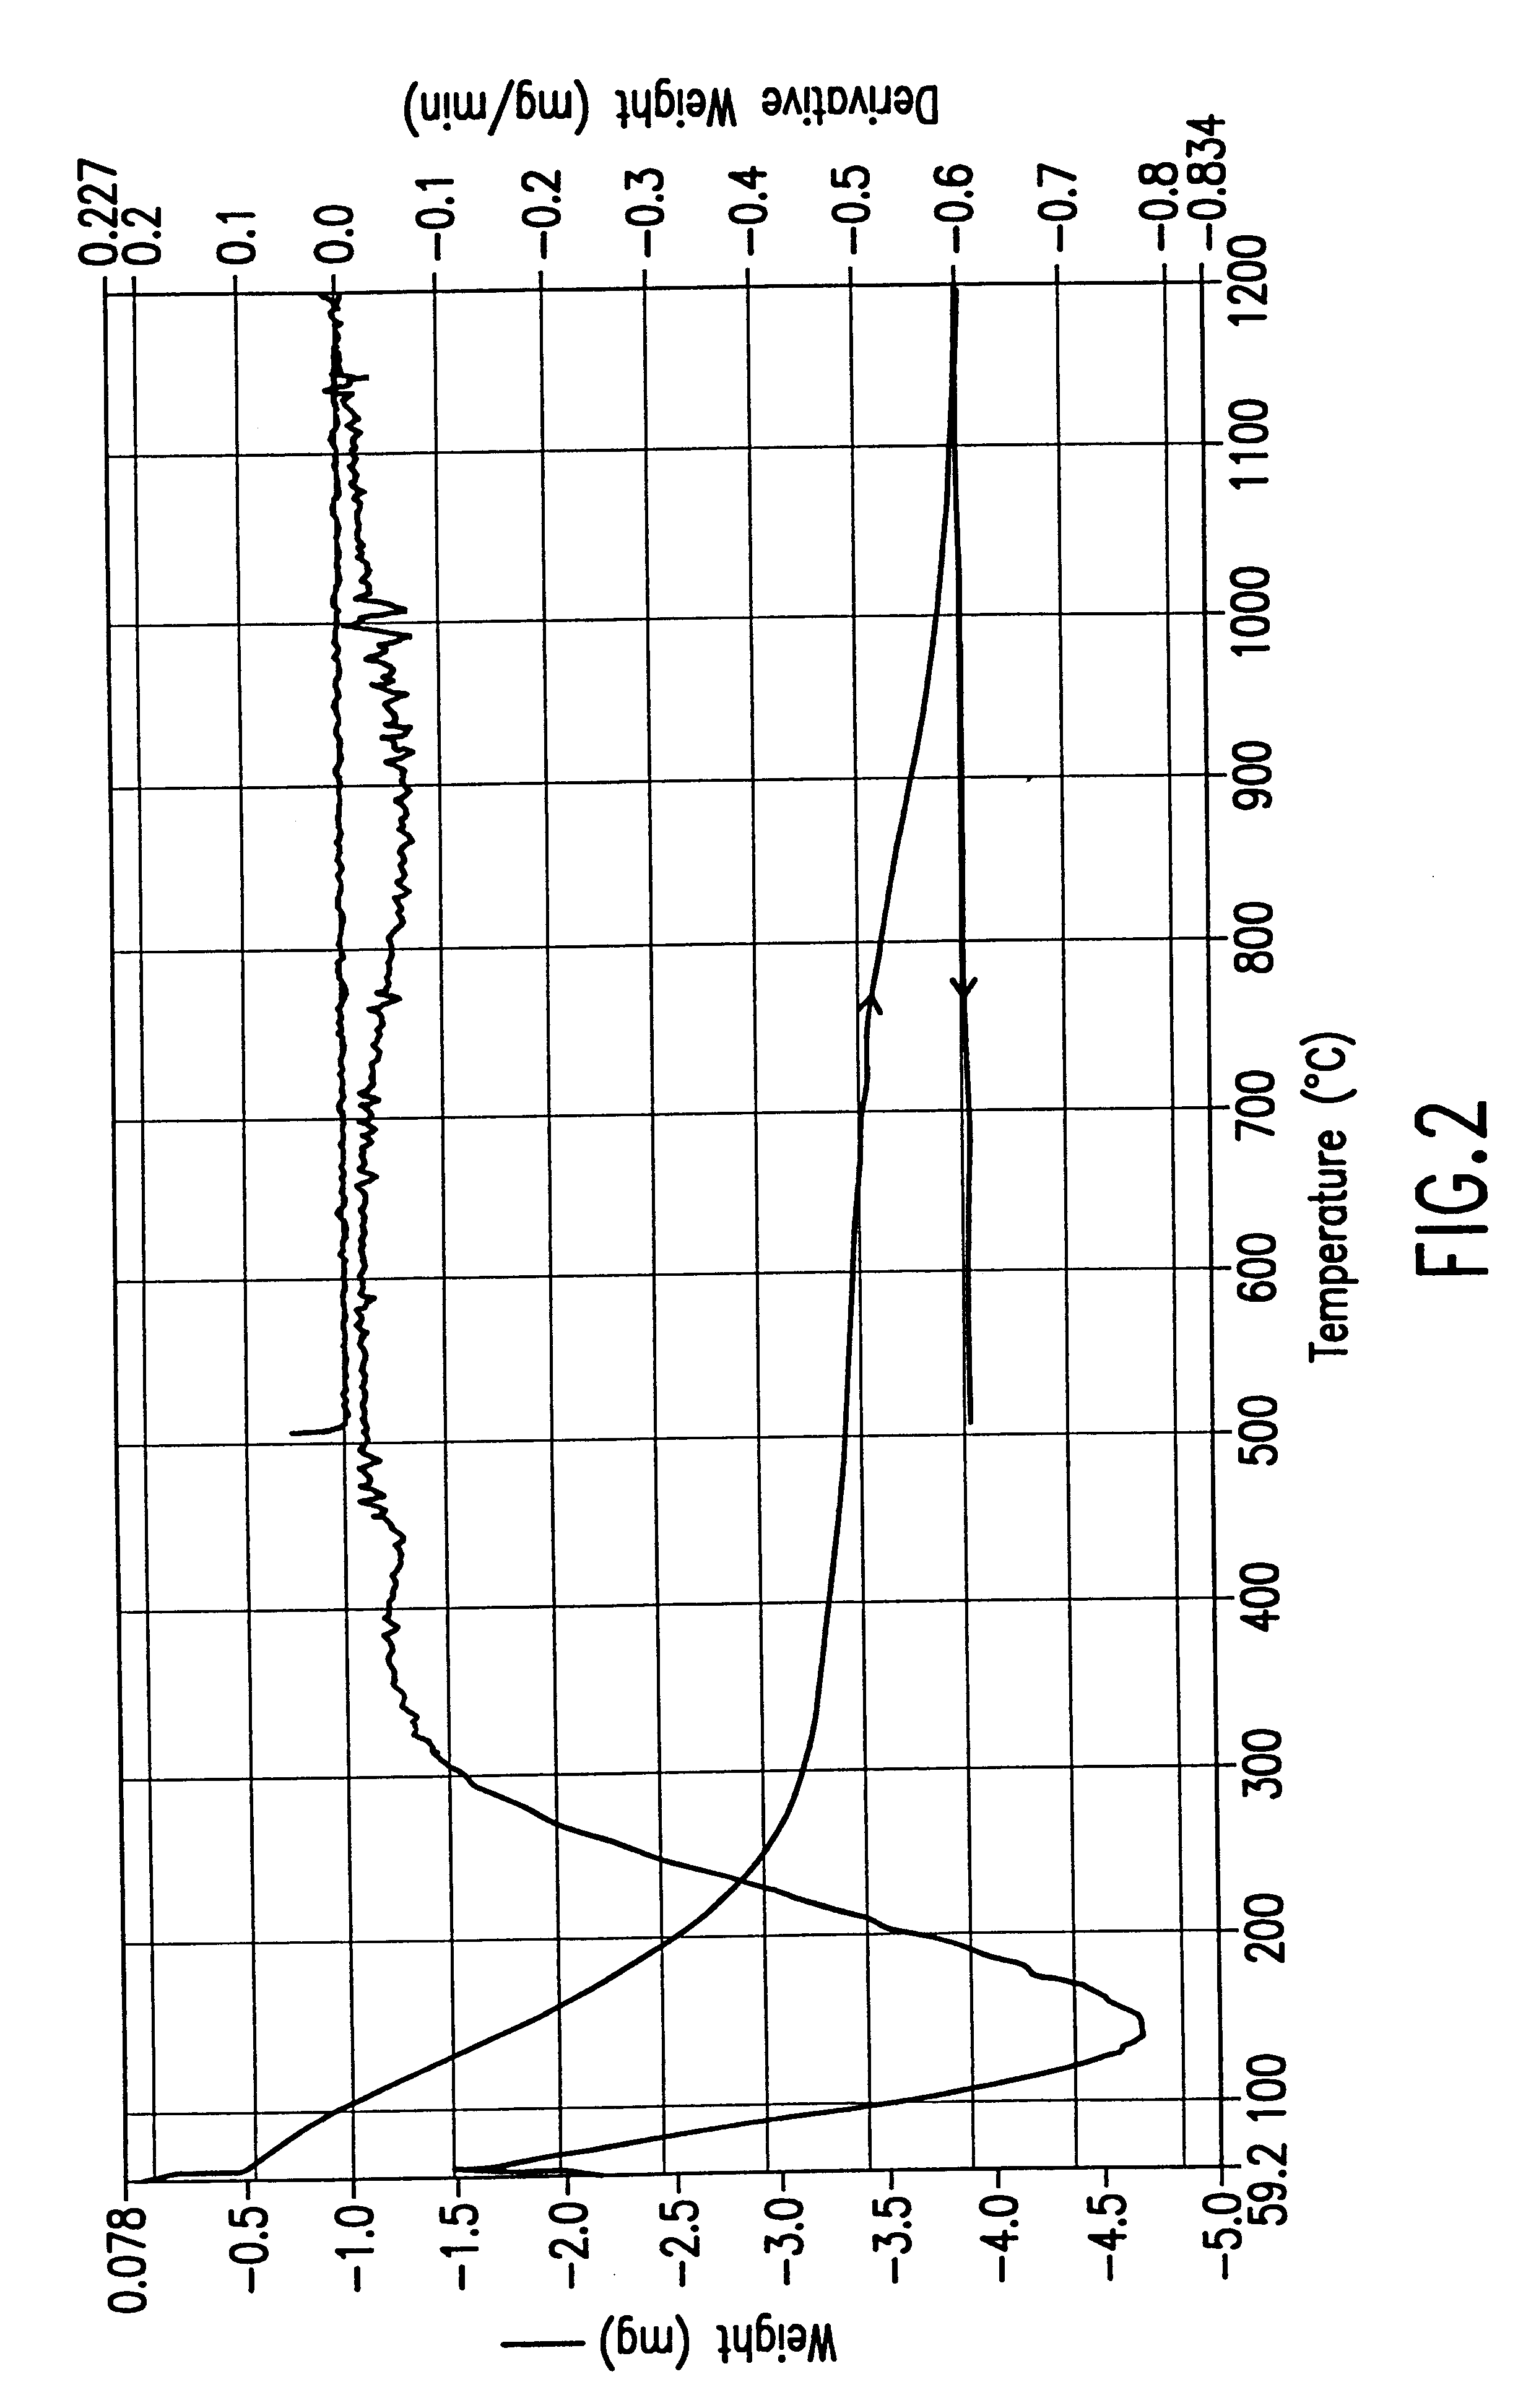 Methods for removal of impurity metals from gases using low metal zeolites